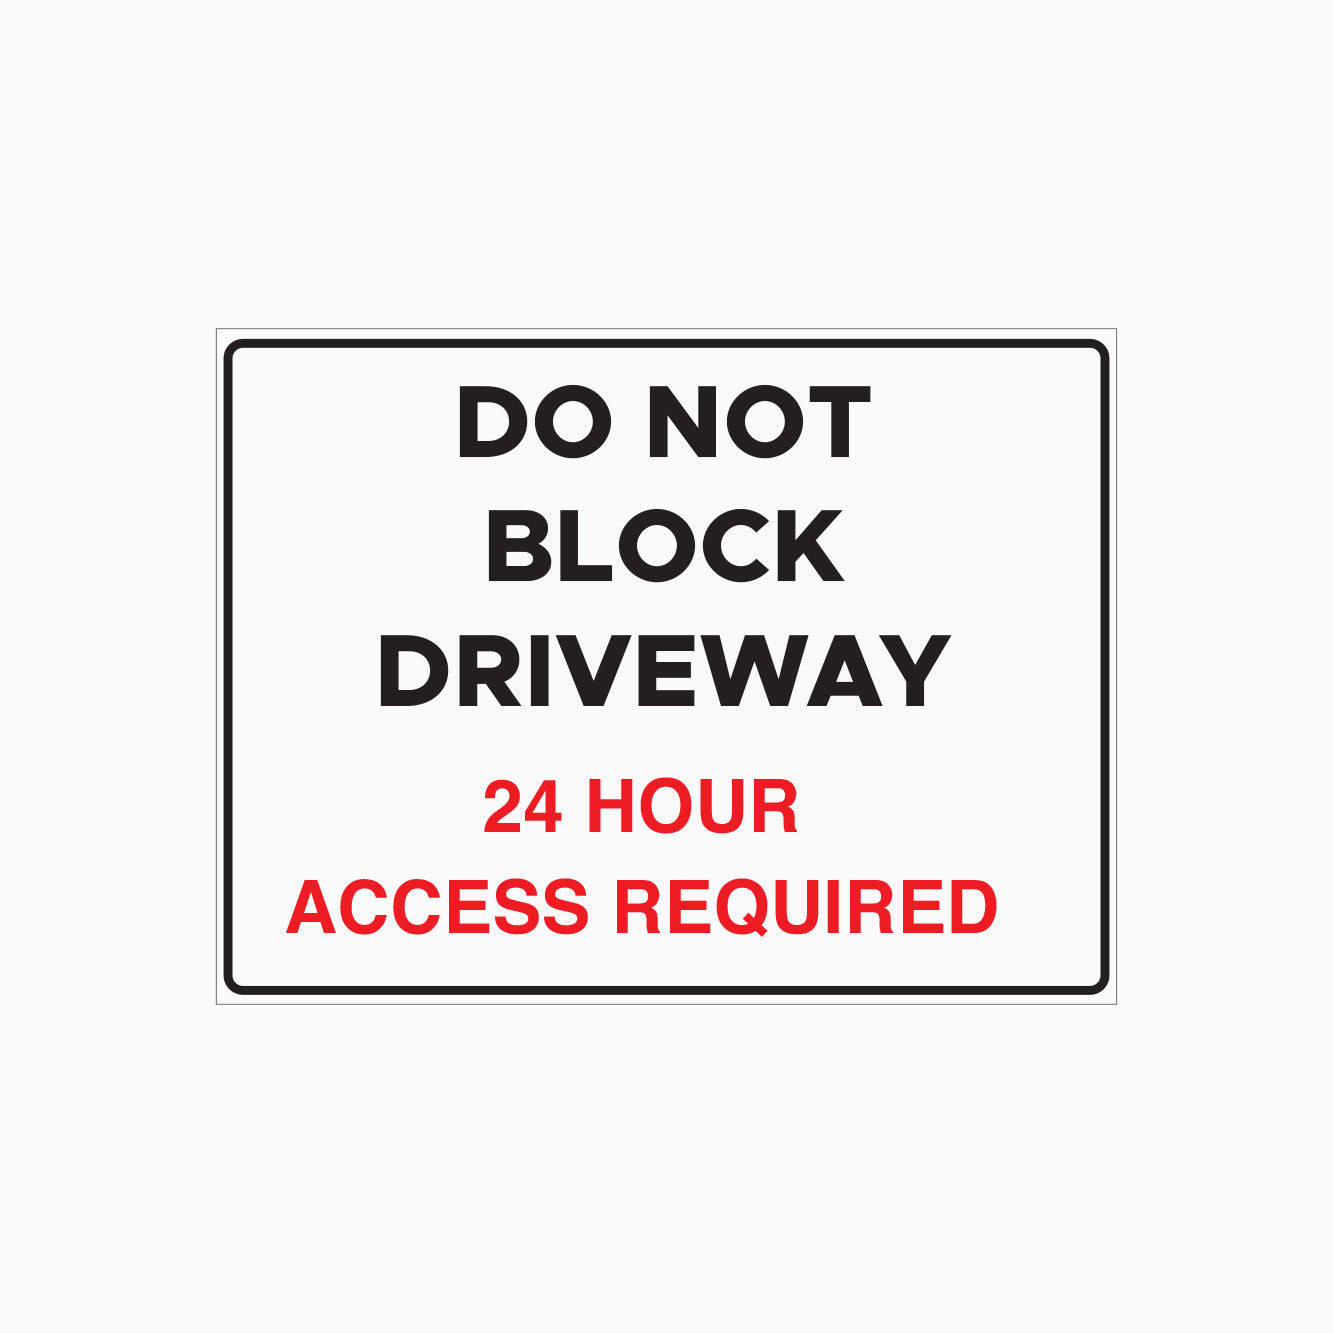 DO NOT BLOCK DRIVEWAY SIGN - 24 HOUR ACCESS REQUIRED SIGN